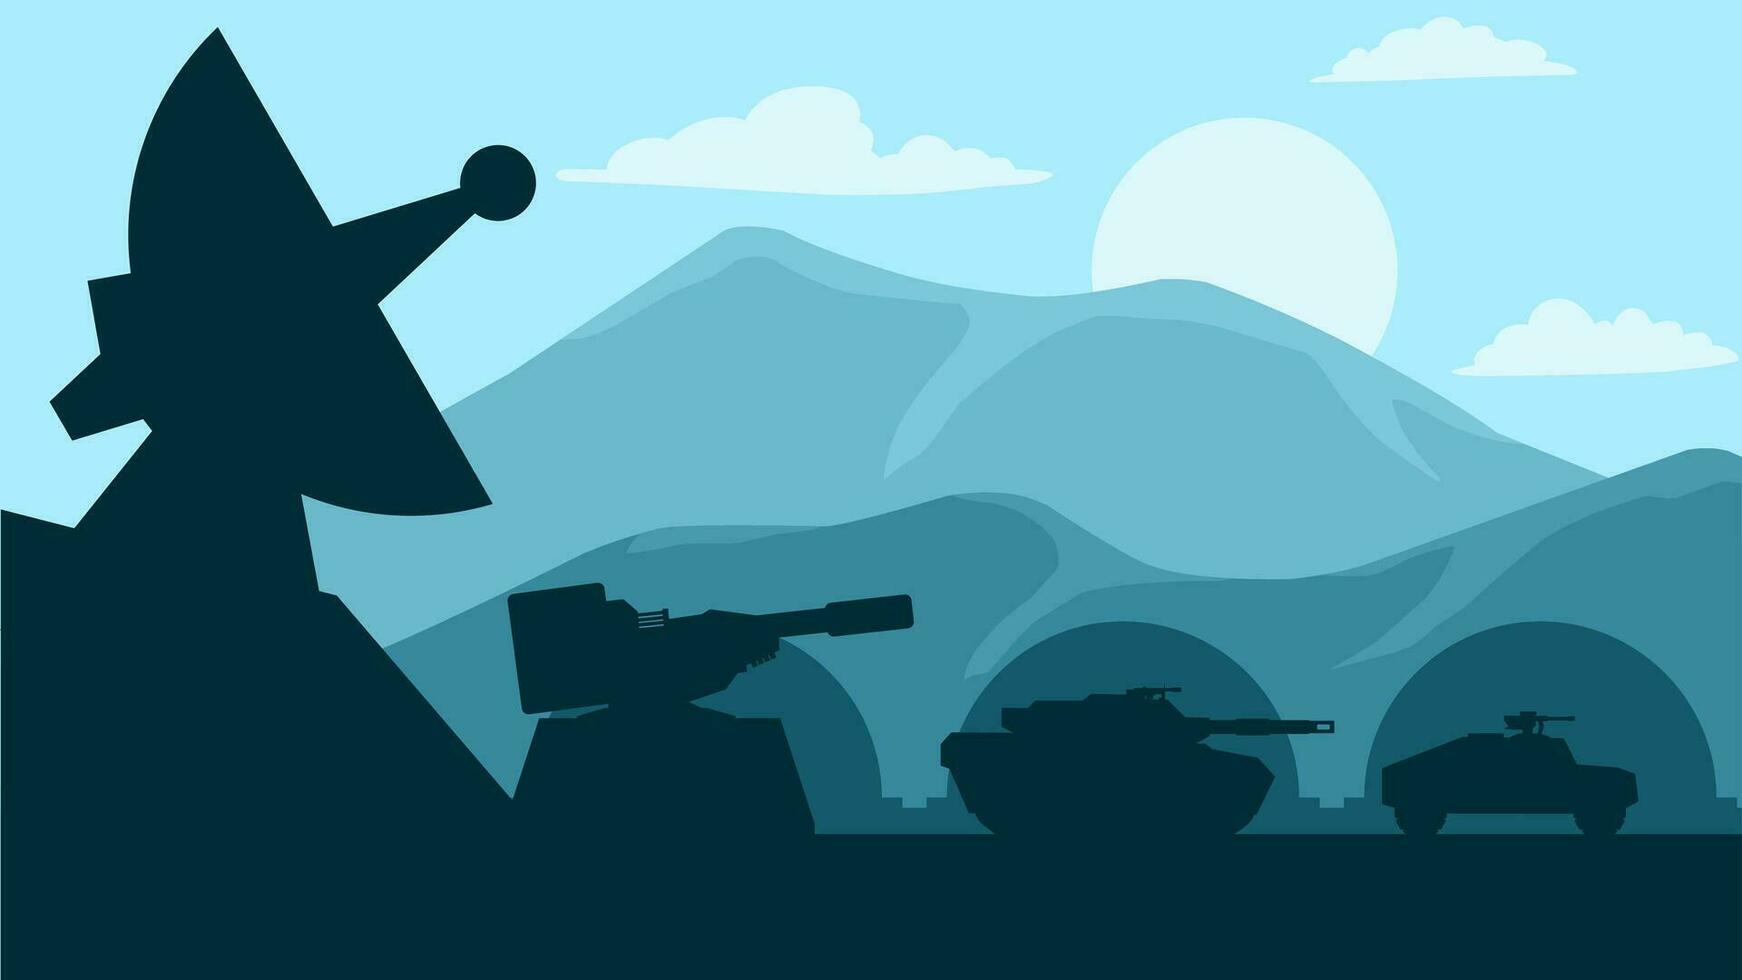 Military landscape vector illustration. Military base with turret and tank. Military silhouette landscape for background, wallpaper, display or landing page. Silhouette of armored vehicle on mountain